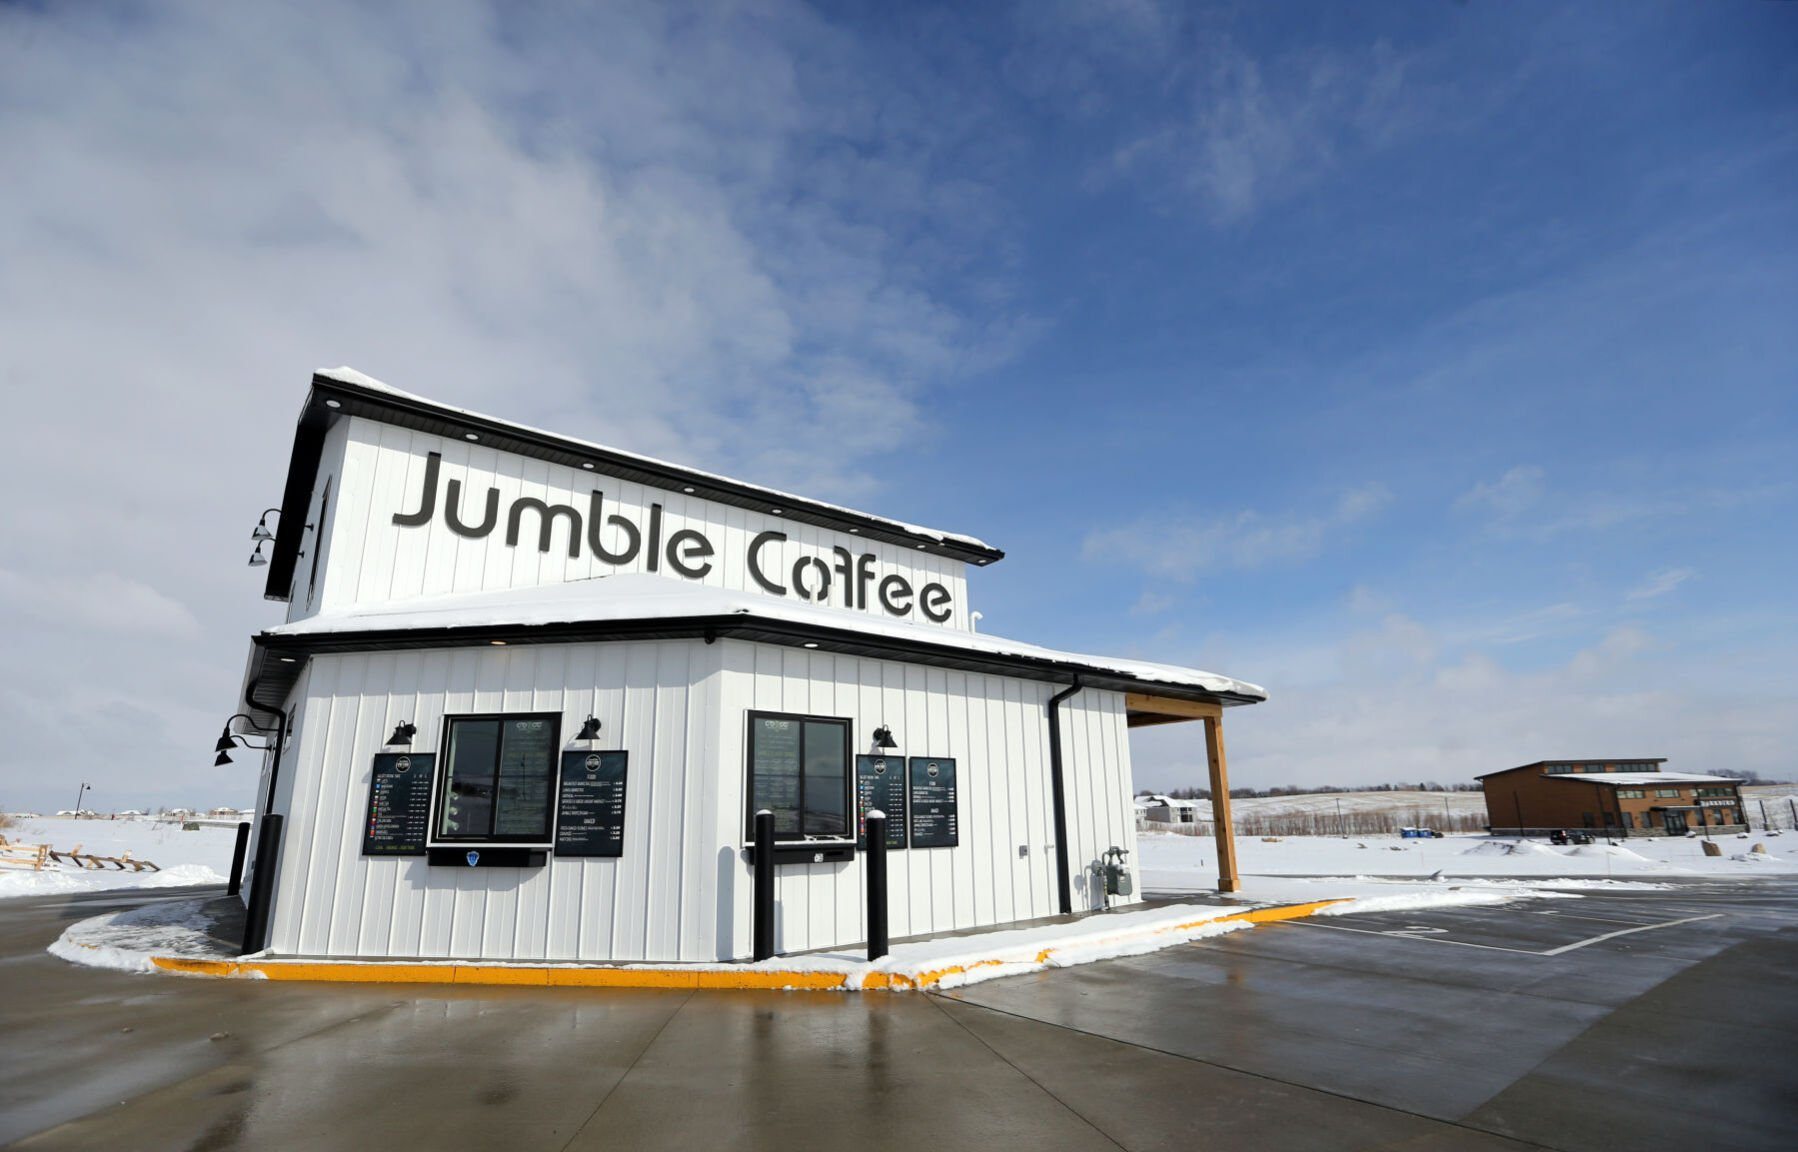 Jumble Coffee Co. in Peosta, Iowa, is a drive-thru location that also has a walk-up window and will include outdoor seating.    PHOTO CREDIT: JESSICA REILLY